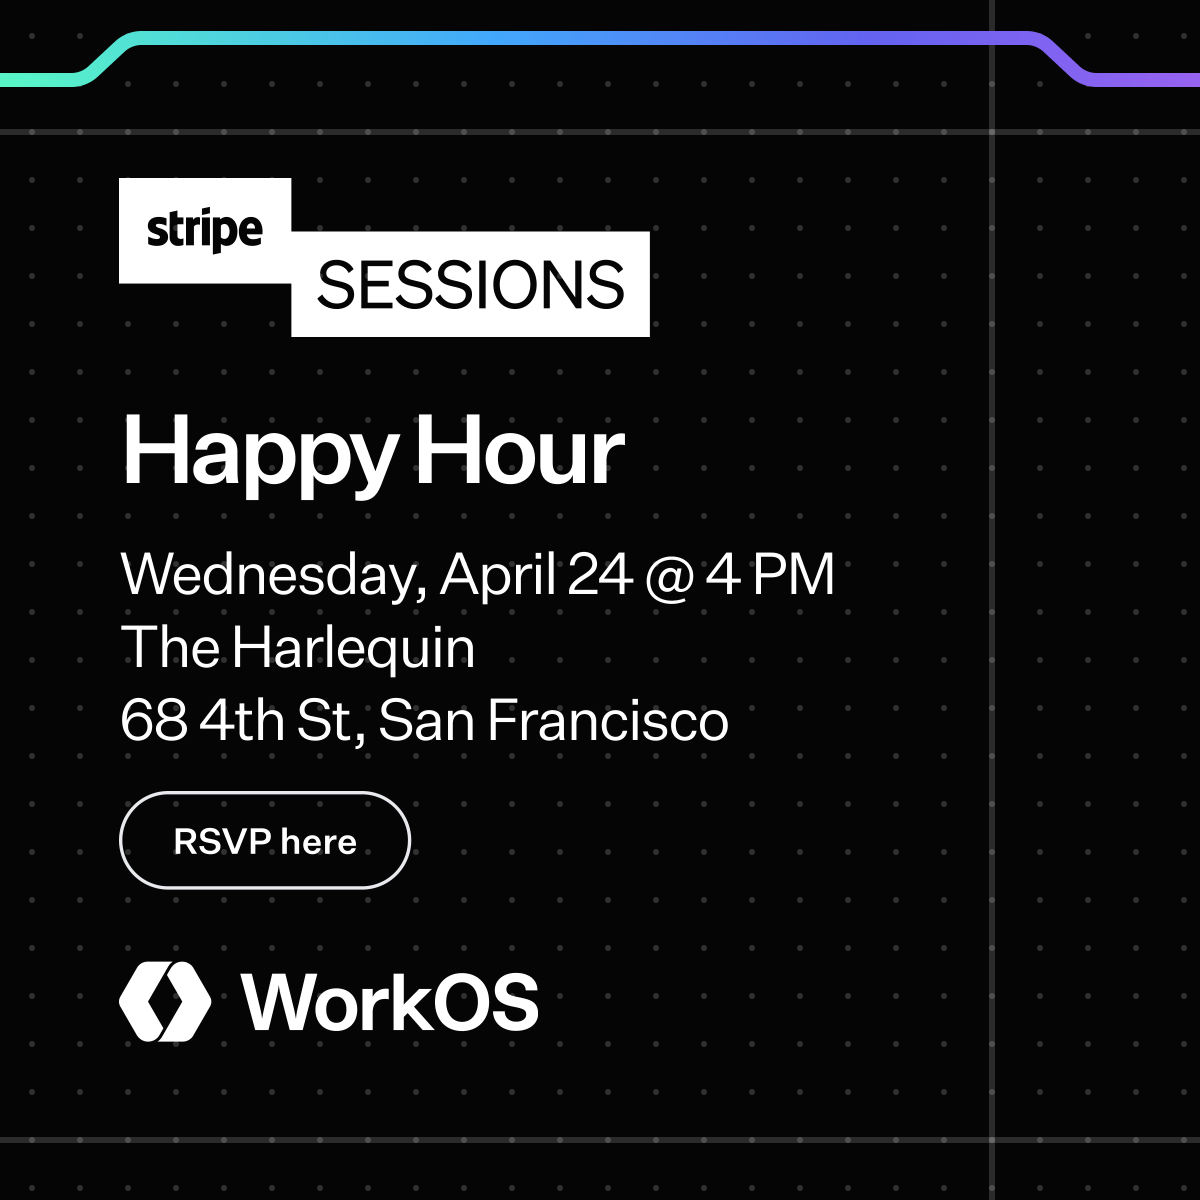 🍻 Stripe Sessions Happy Hour 🌉 April 24 @ 4PM at The Harlequin, SF Stop by for an evening of drinks, food, and devtool chats. RSVP here: partiful.com/e/XvYdYwnWzOgT…